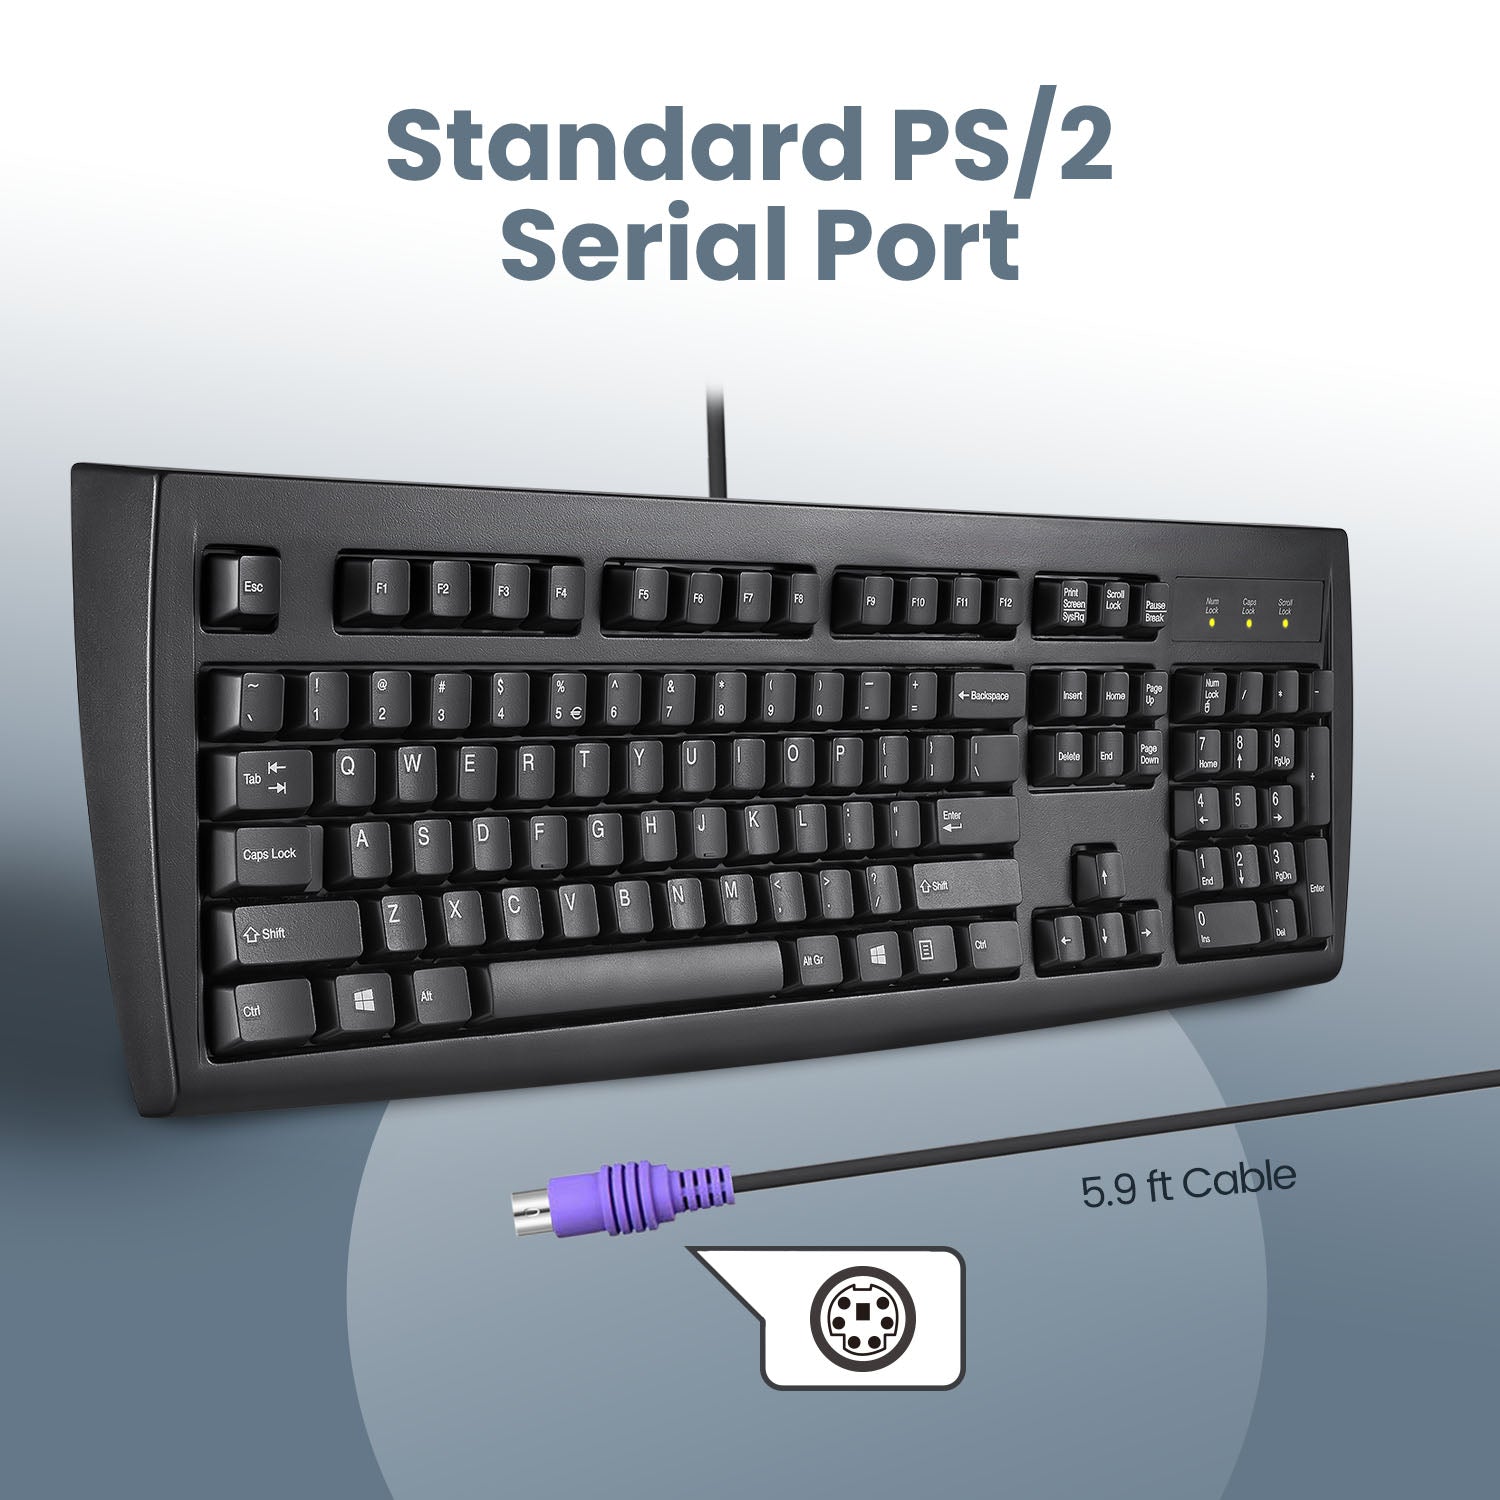 Your classic PS/2 keyboard